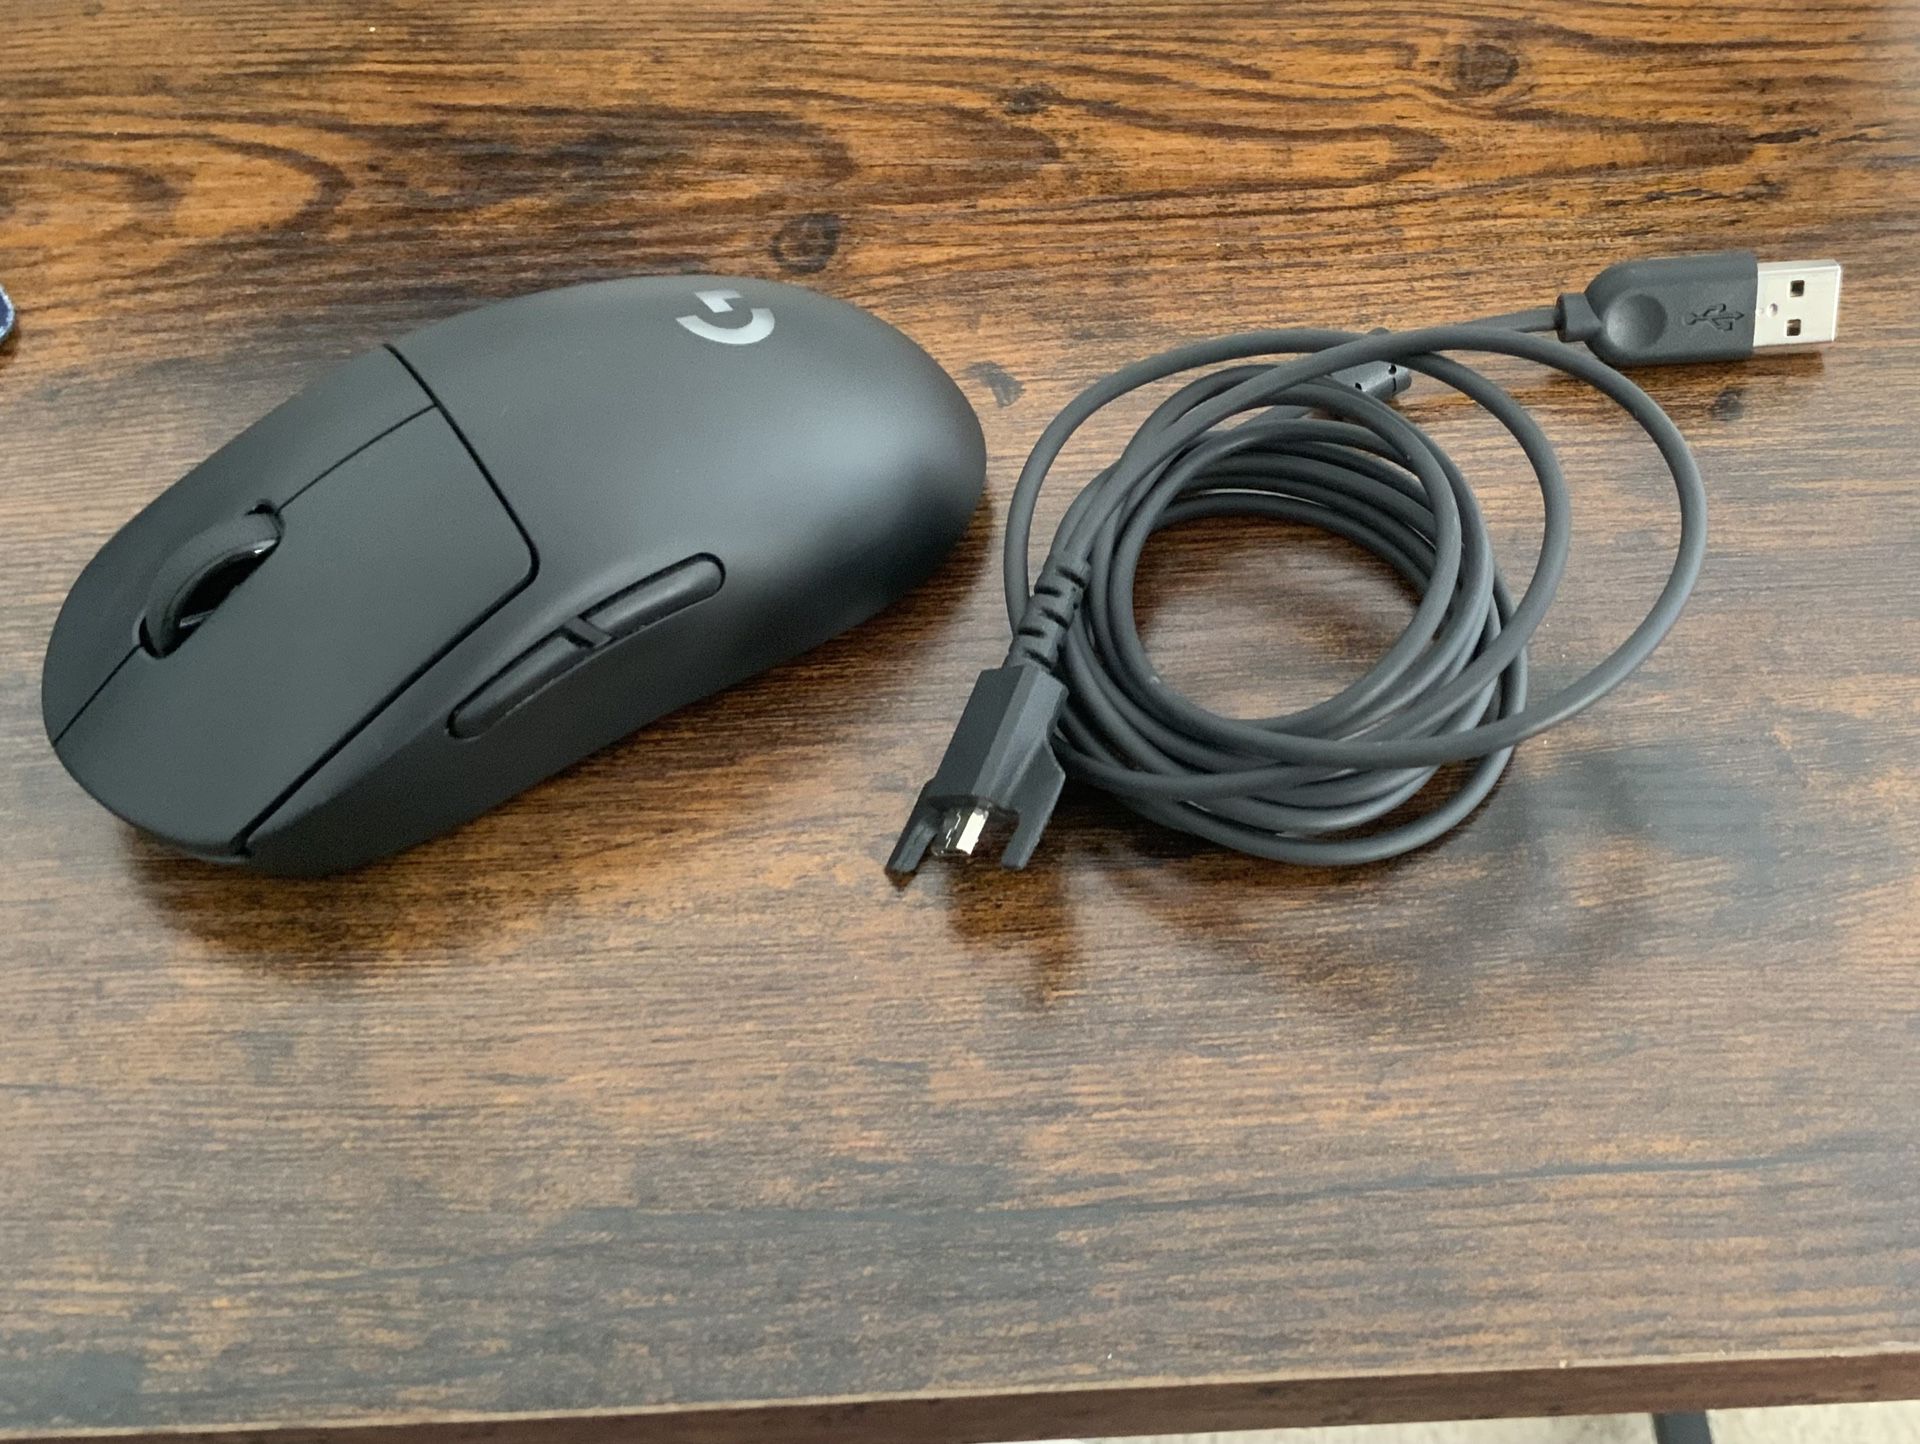 G Pro Wireless Mouse